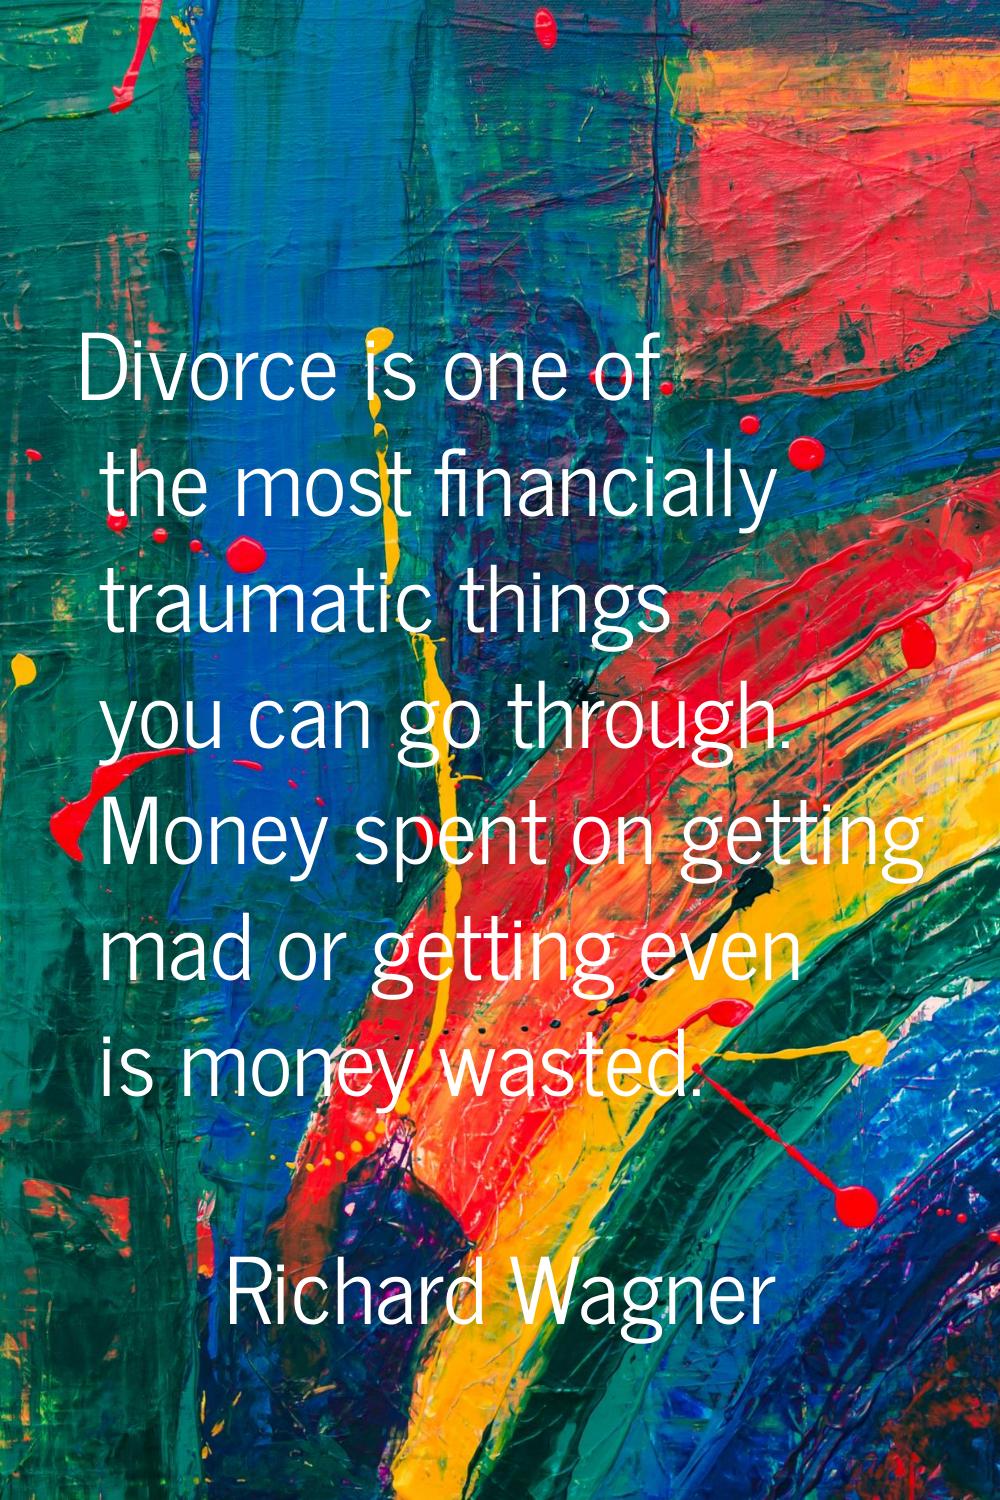 Divorce is one of the most financially traumatic things you can go through. Money spent on getting 